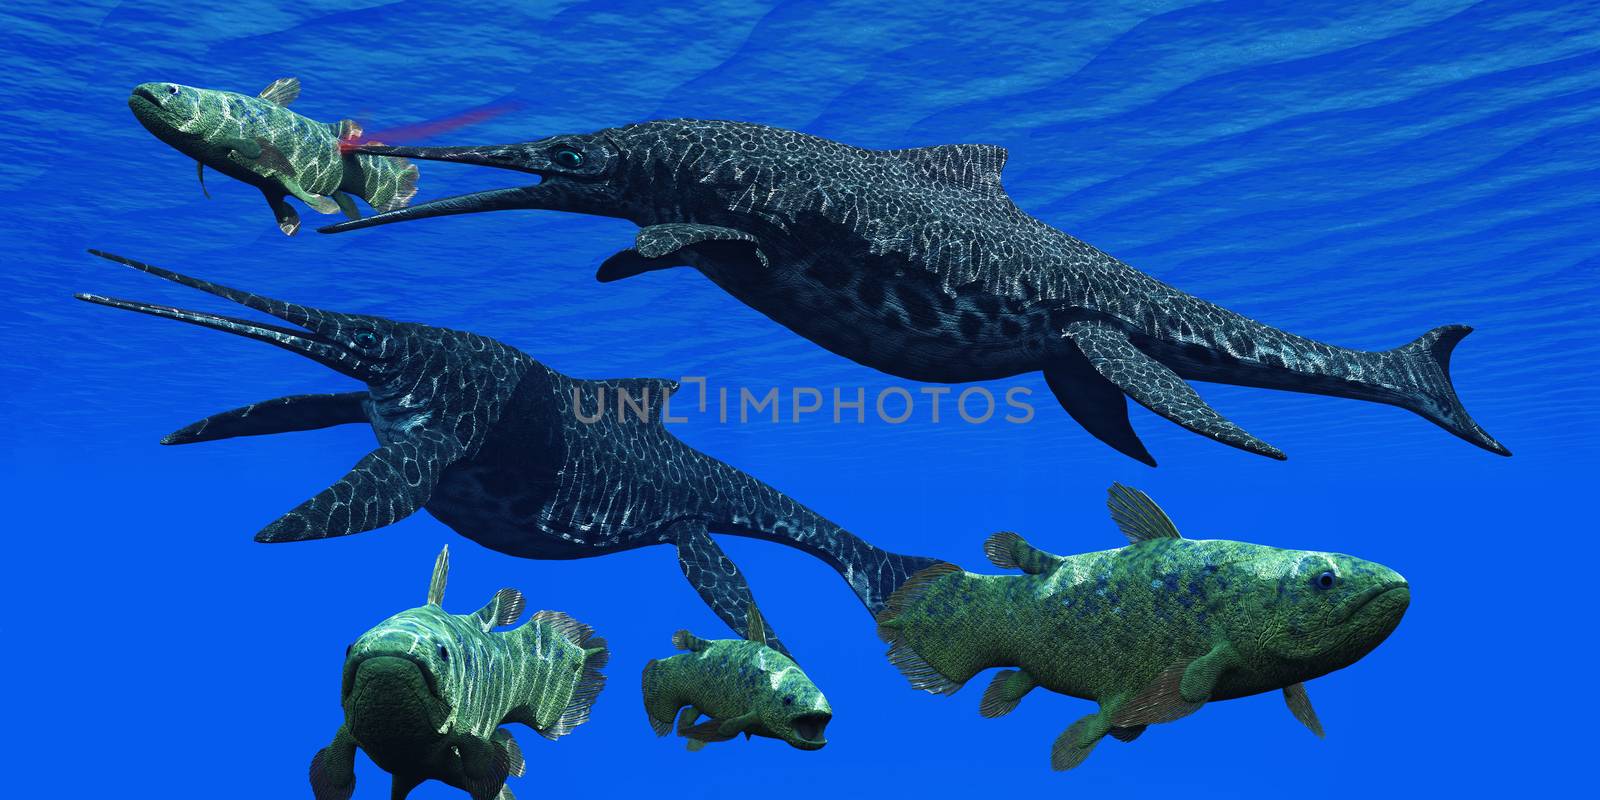 A Shonisaurus Ichthyosaur stabs a Coelacanth fish trying to get away from these predators in a Triassic ocean.